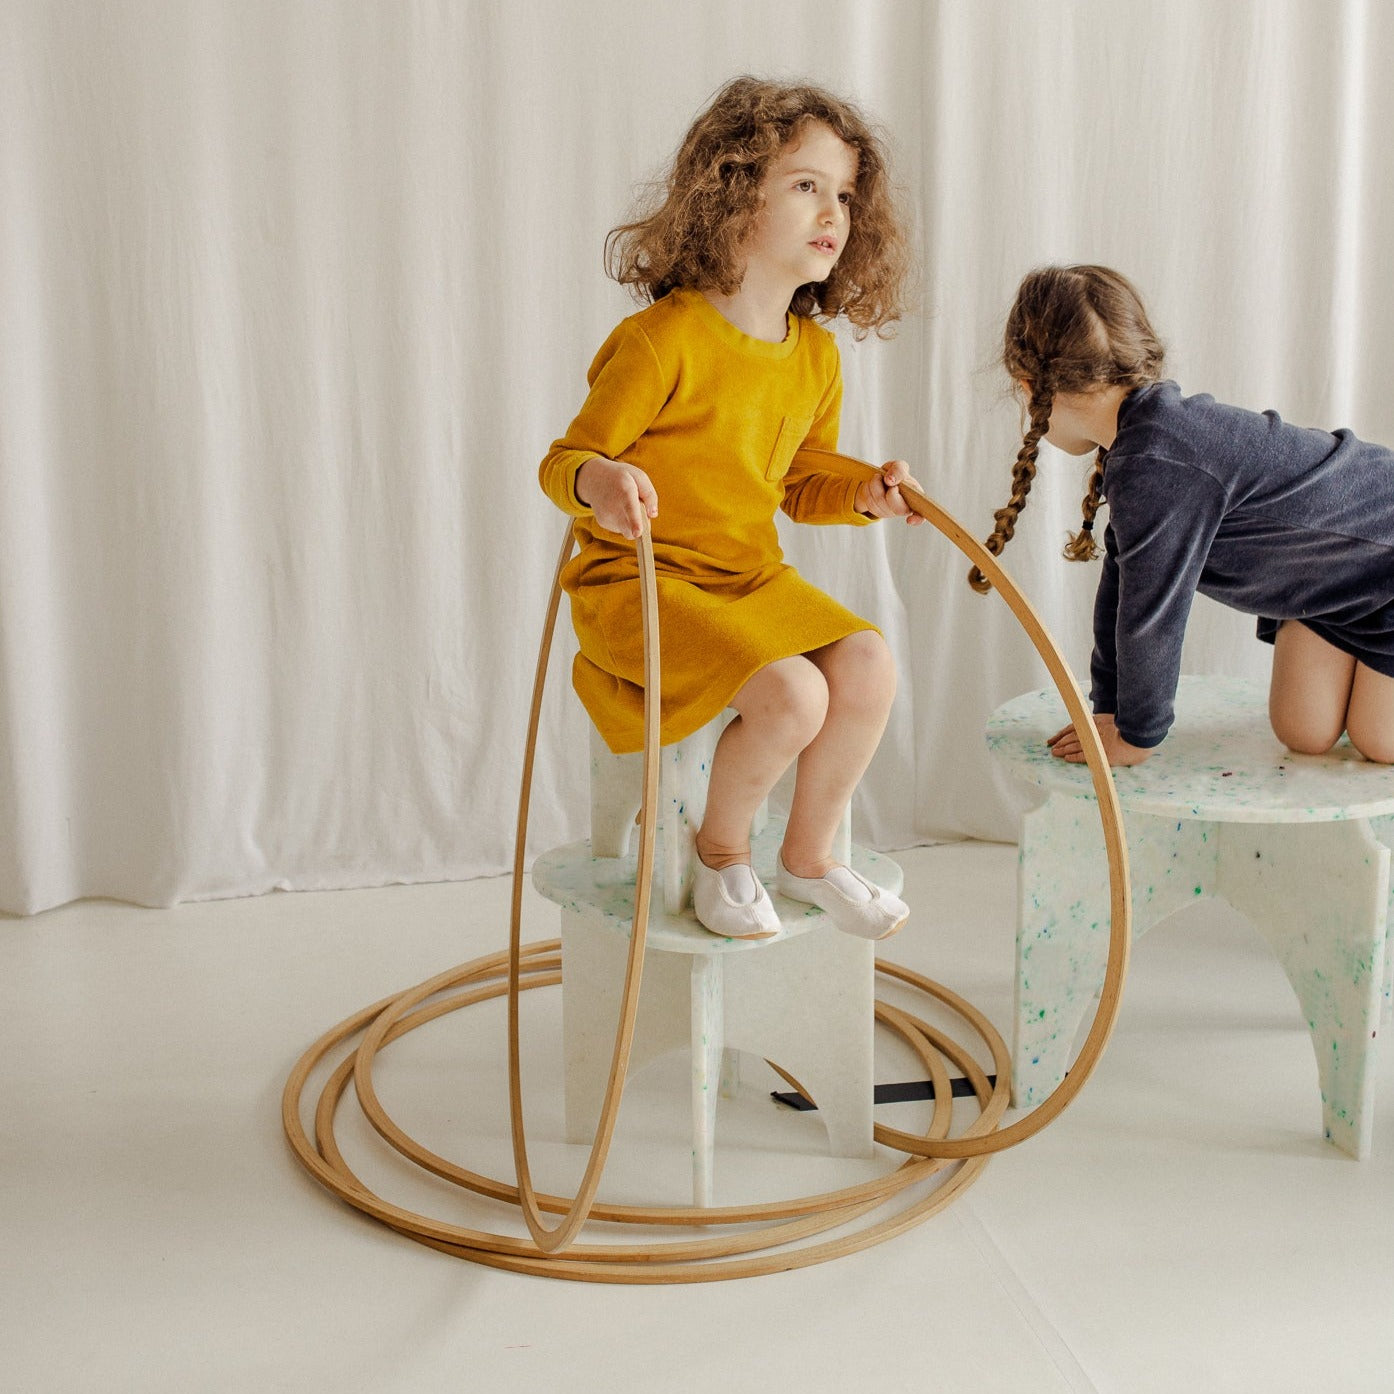 KIDS PLAYING ON TABLE AND STOOL BY THE MINIMONO PROJECT - BRAND FOR ECO FRIENDLY - PLAYFUL - MULTI FUNCTIONAL - SUSTAINABLE - HIGH QUALITY - DESIGN FURNITURE FROM RECYCLED PLASTIC FOR BOTH ADULT AND CHILDREN MADE IN BERLIN GERMANY